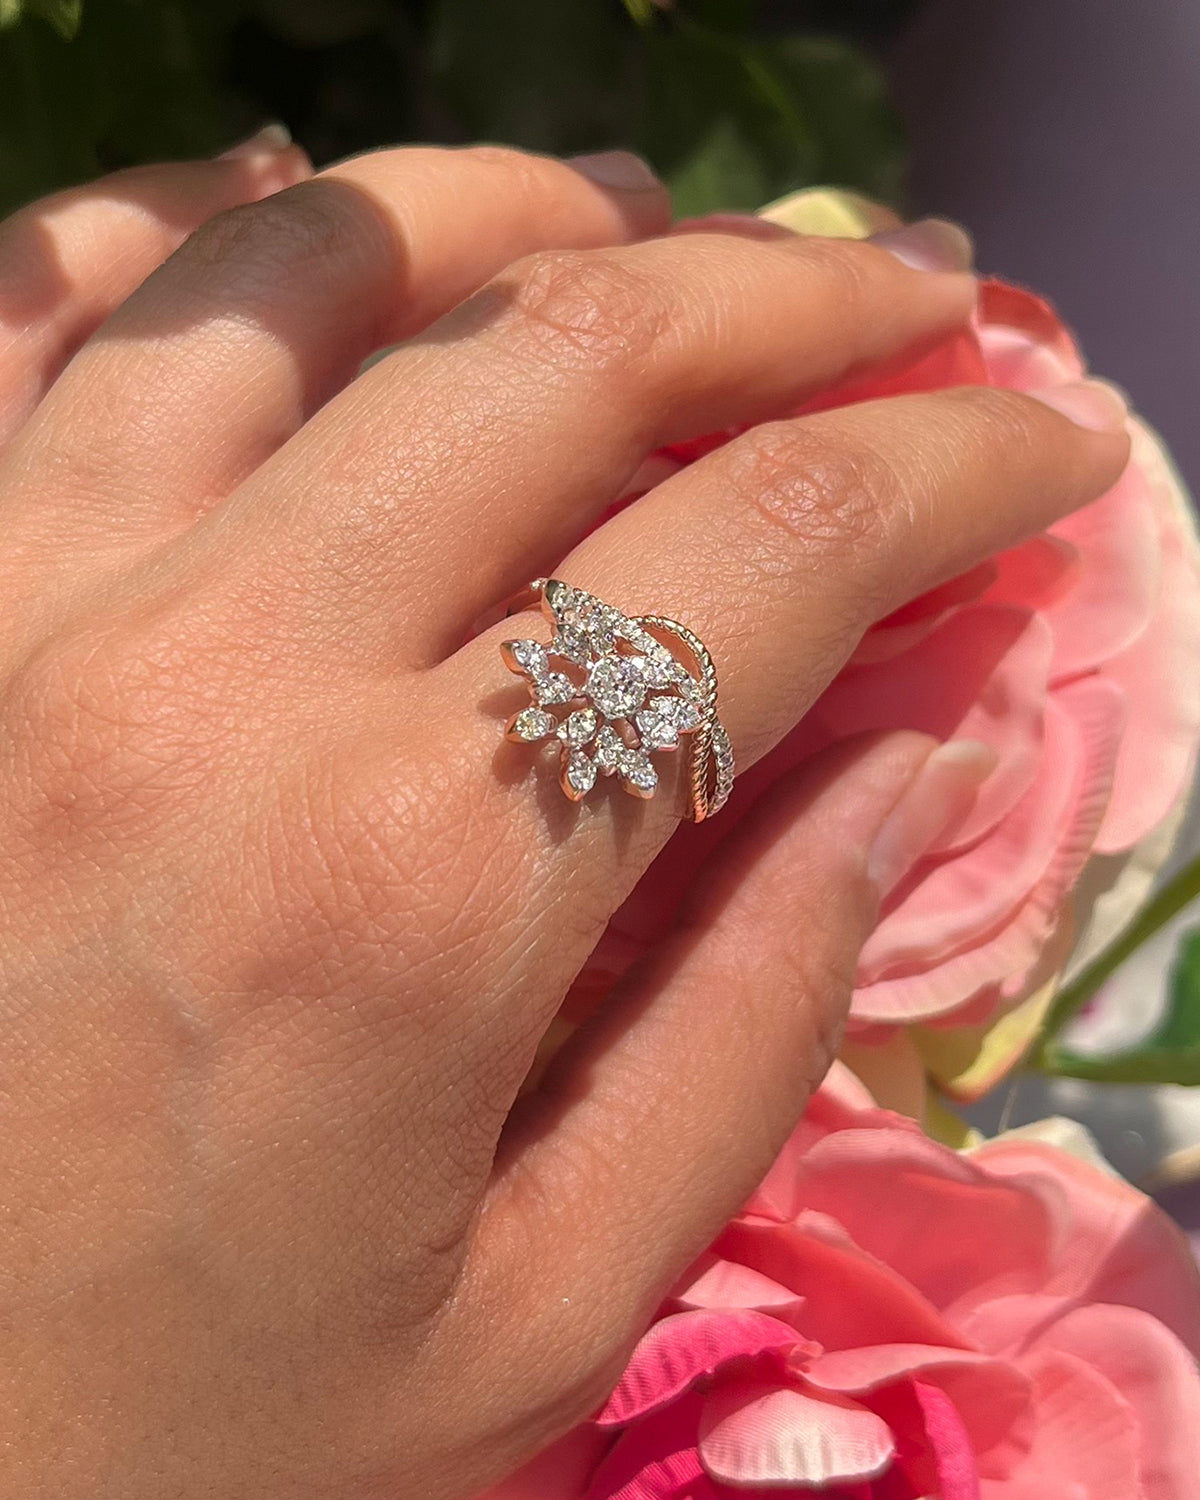 Stunning S925 Silver Punk Band Ring With Diamond Accents Perfect Wedding Or Daily  Wear Moissanite Jewelry Gift For Women PS64432567 From Xvwed, $34.37 |  DHgate.Com